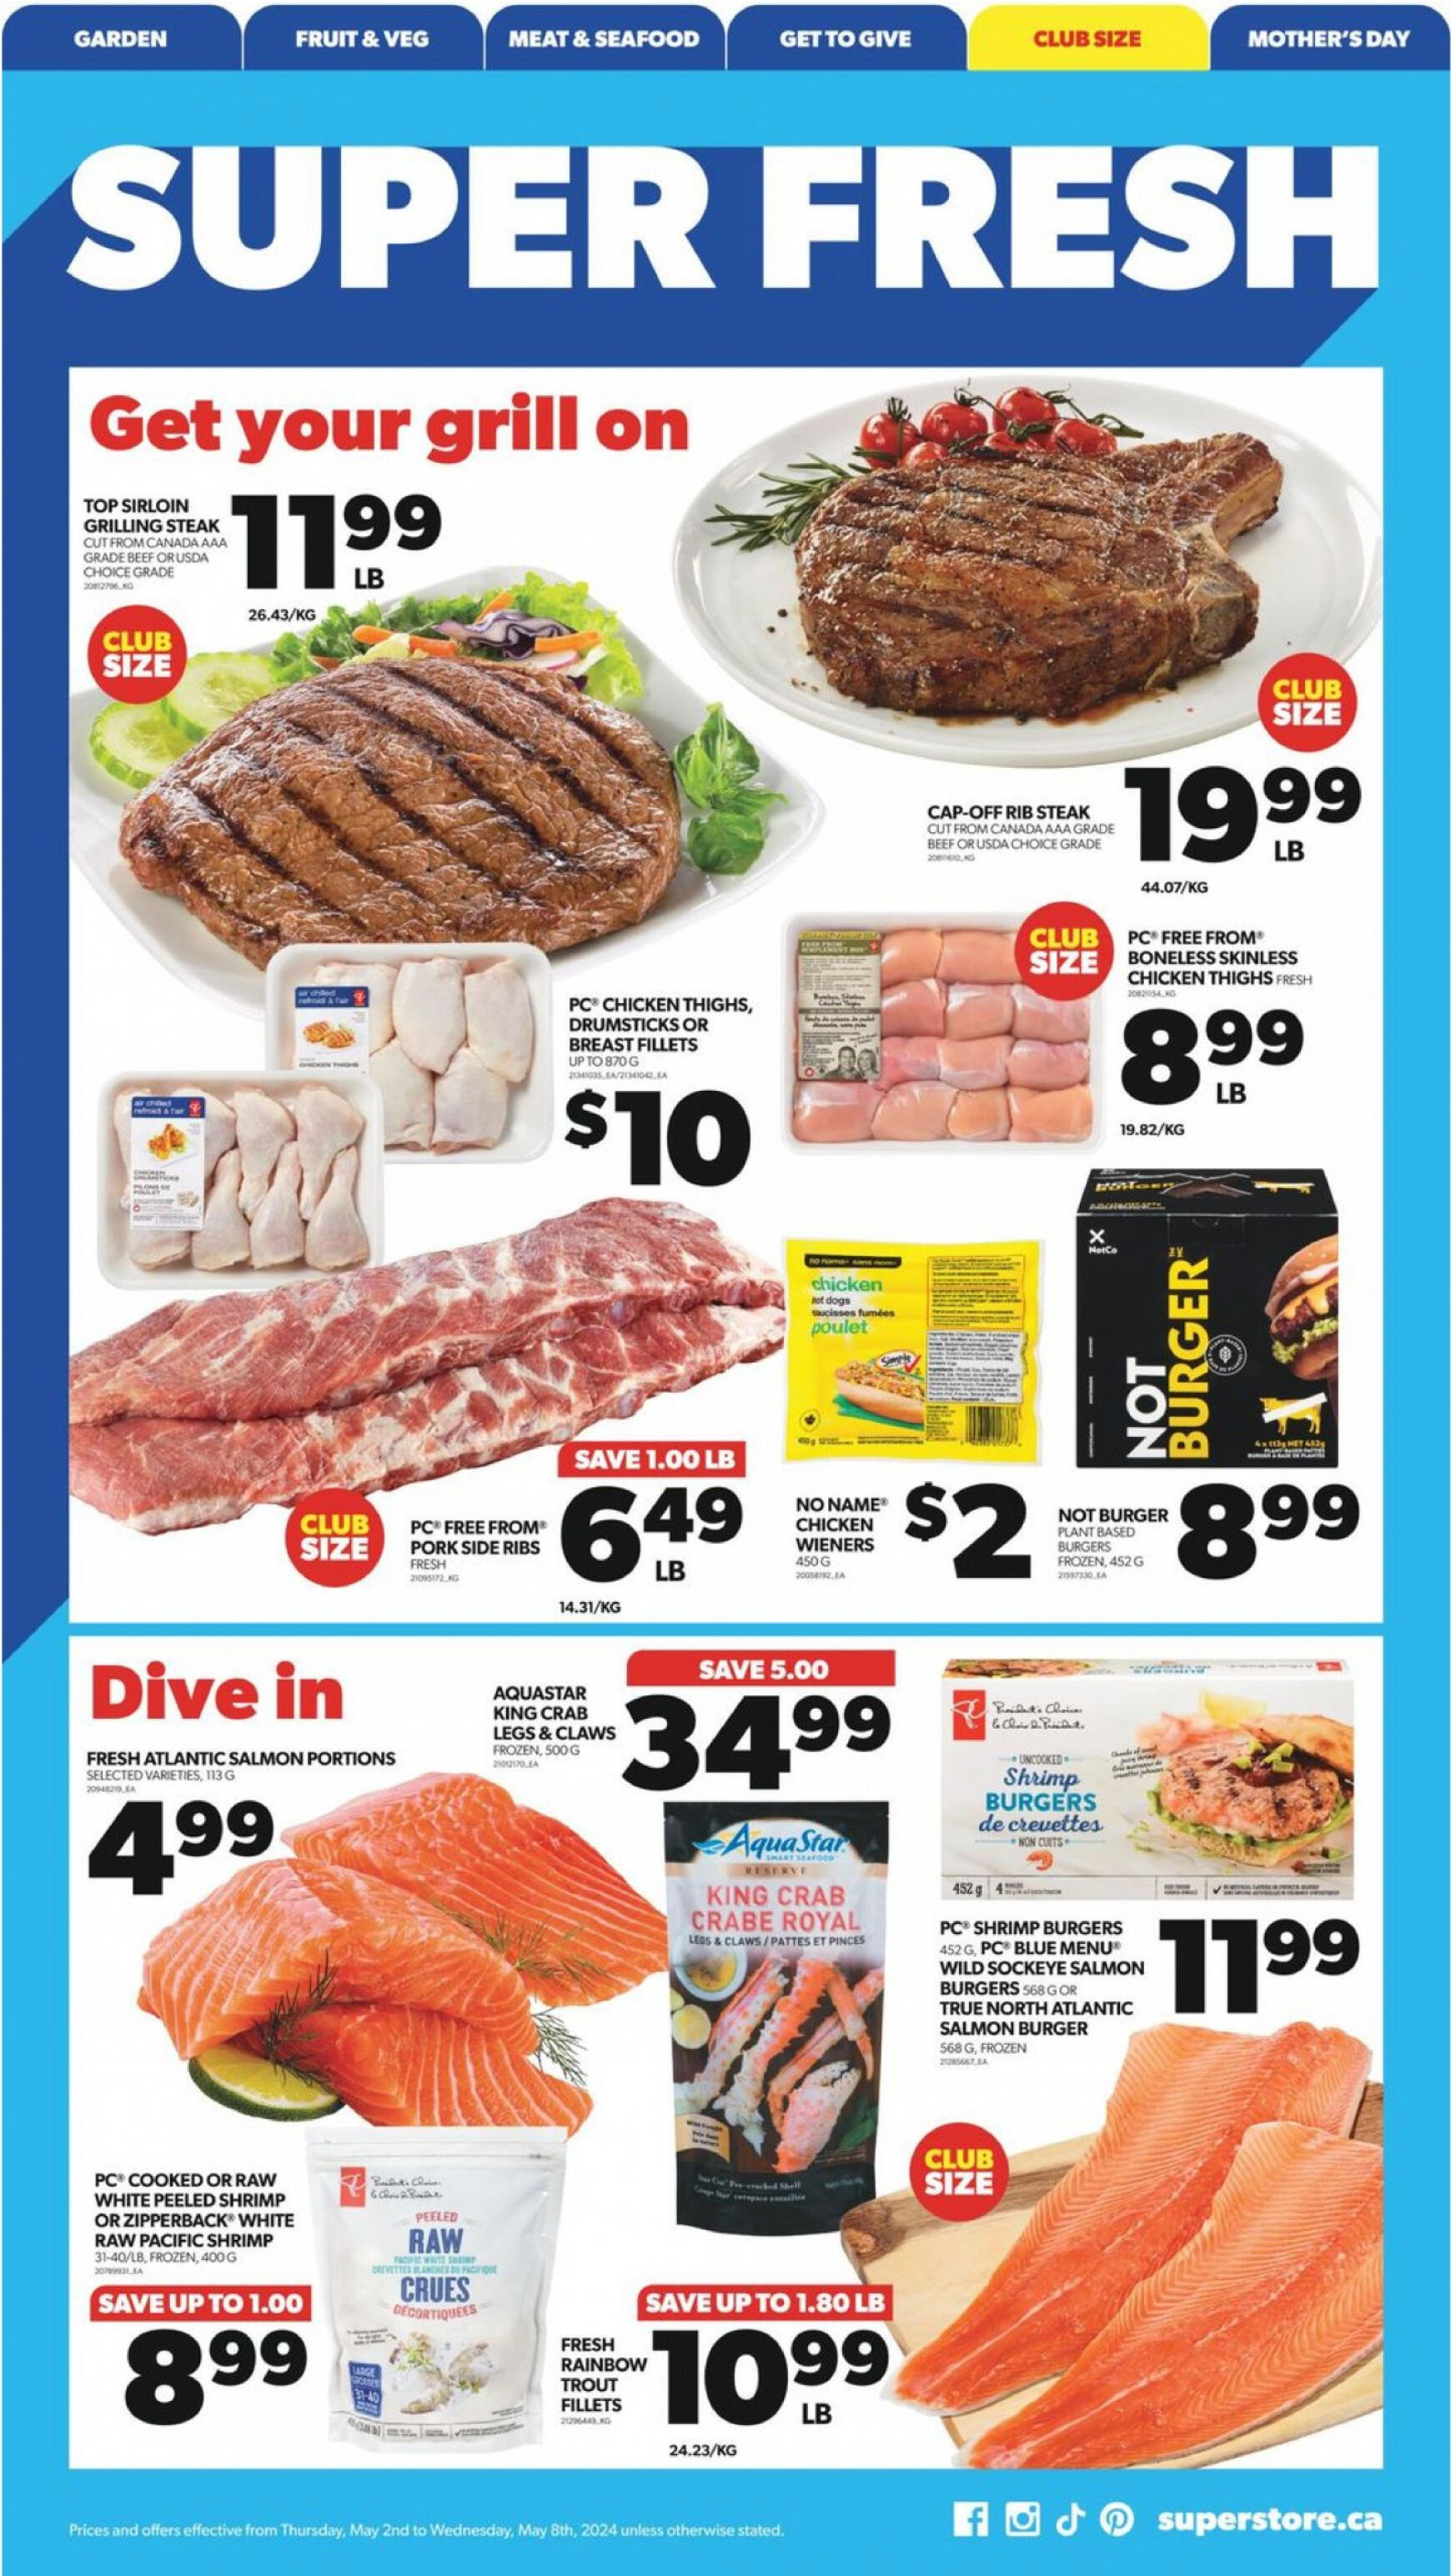 real-canadian-superstore - Real Canadian Superstore flyer current 02.05. - 08.05. - page: 9